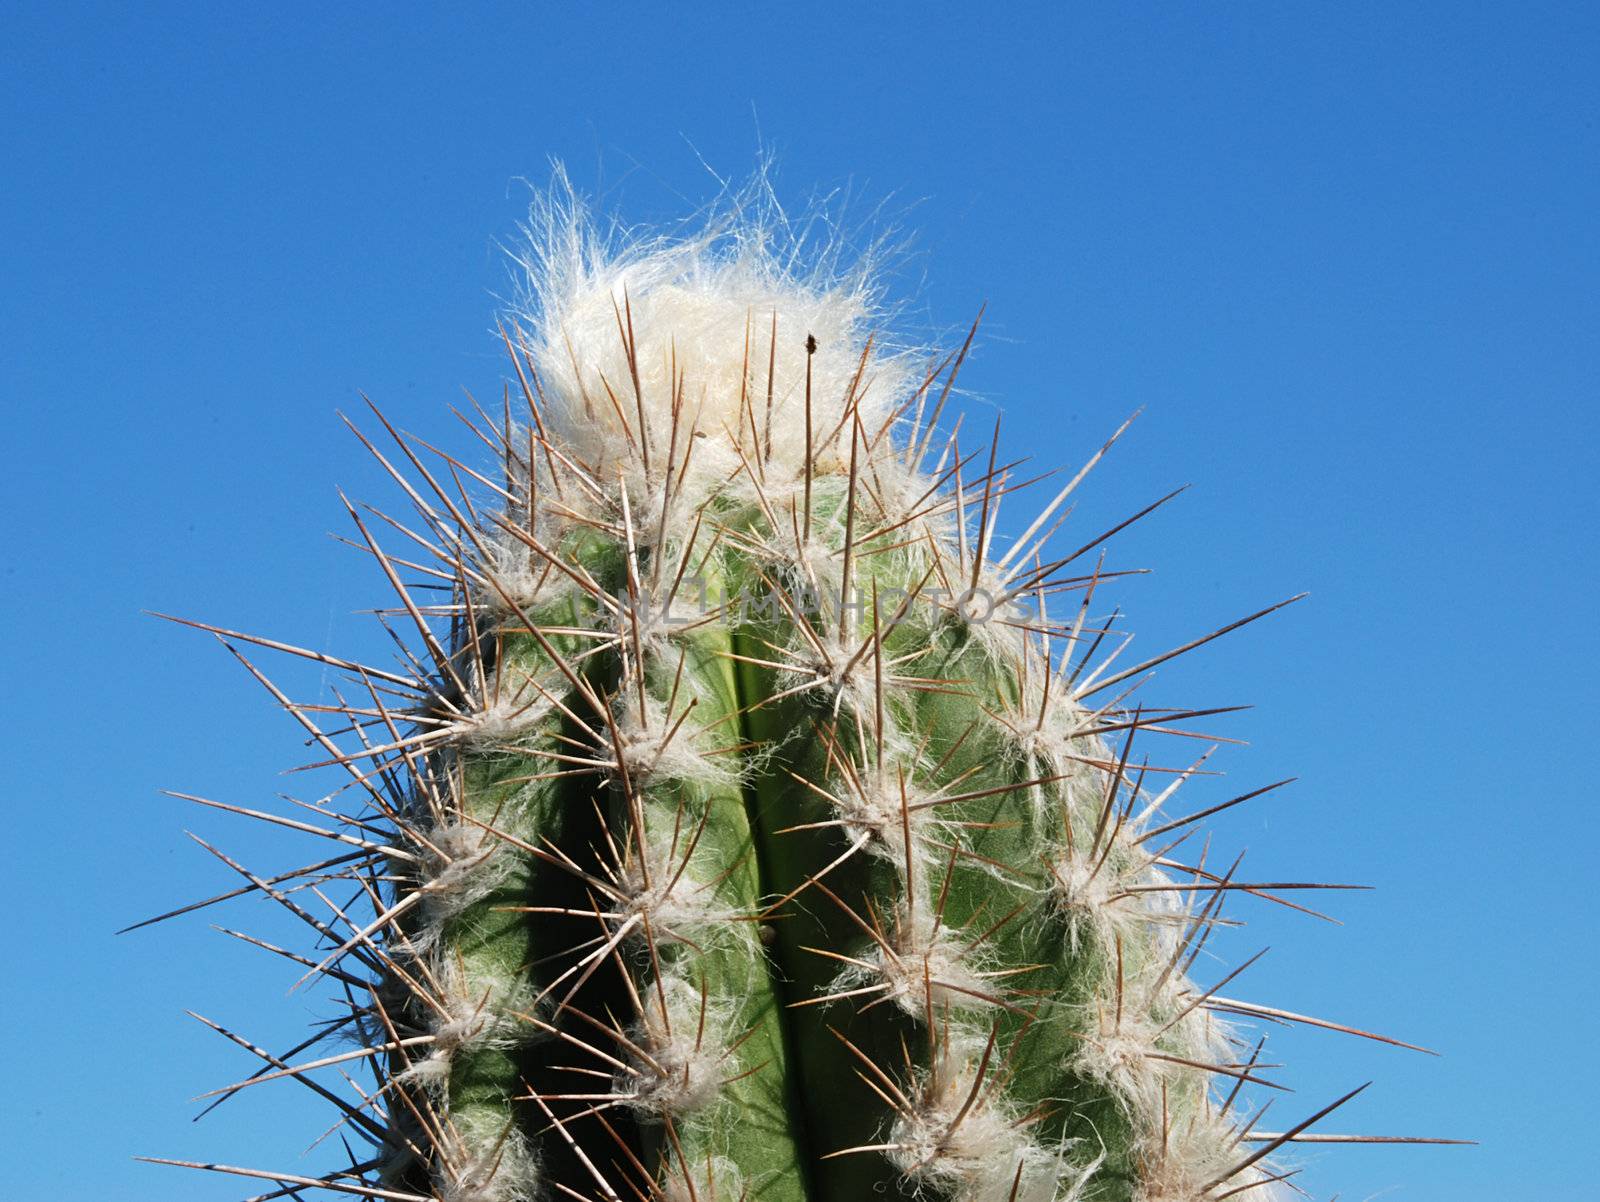 Cactus and sky by fyletto